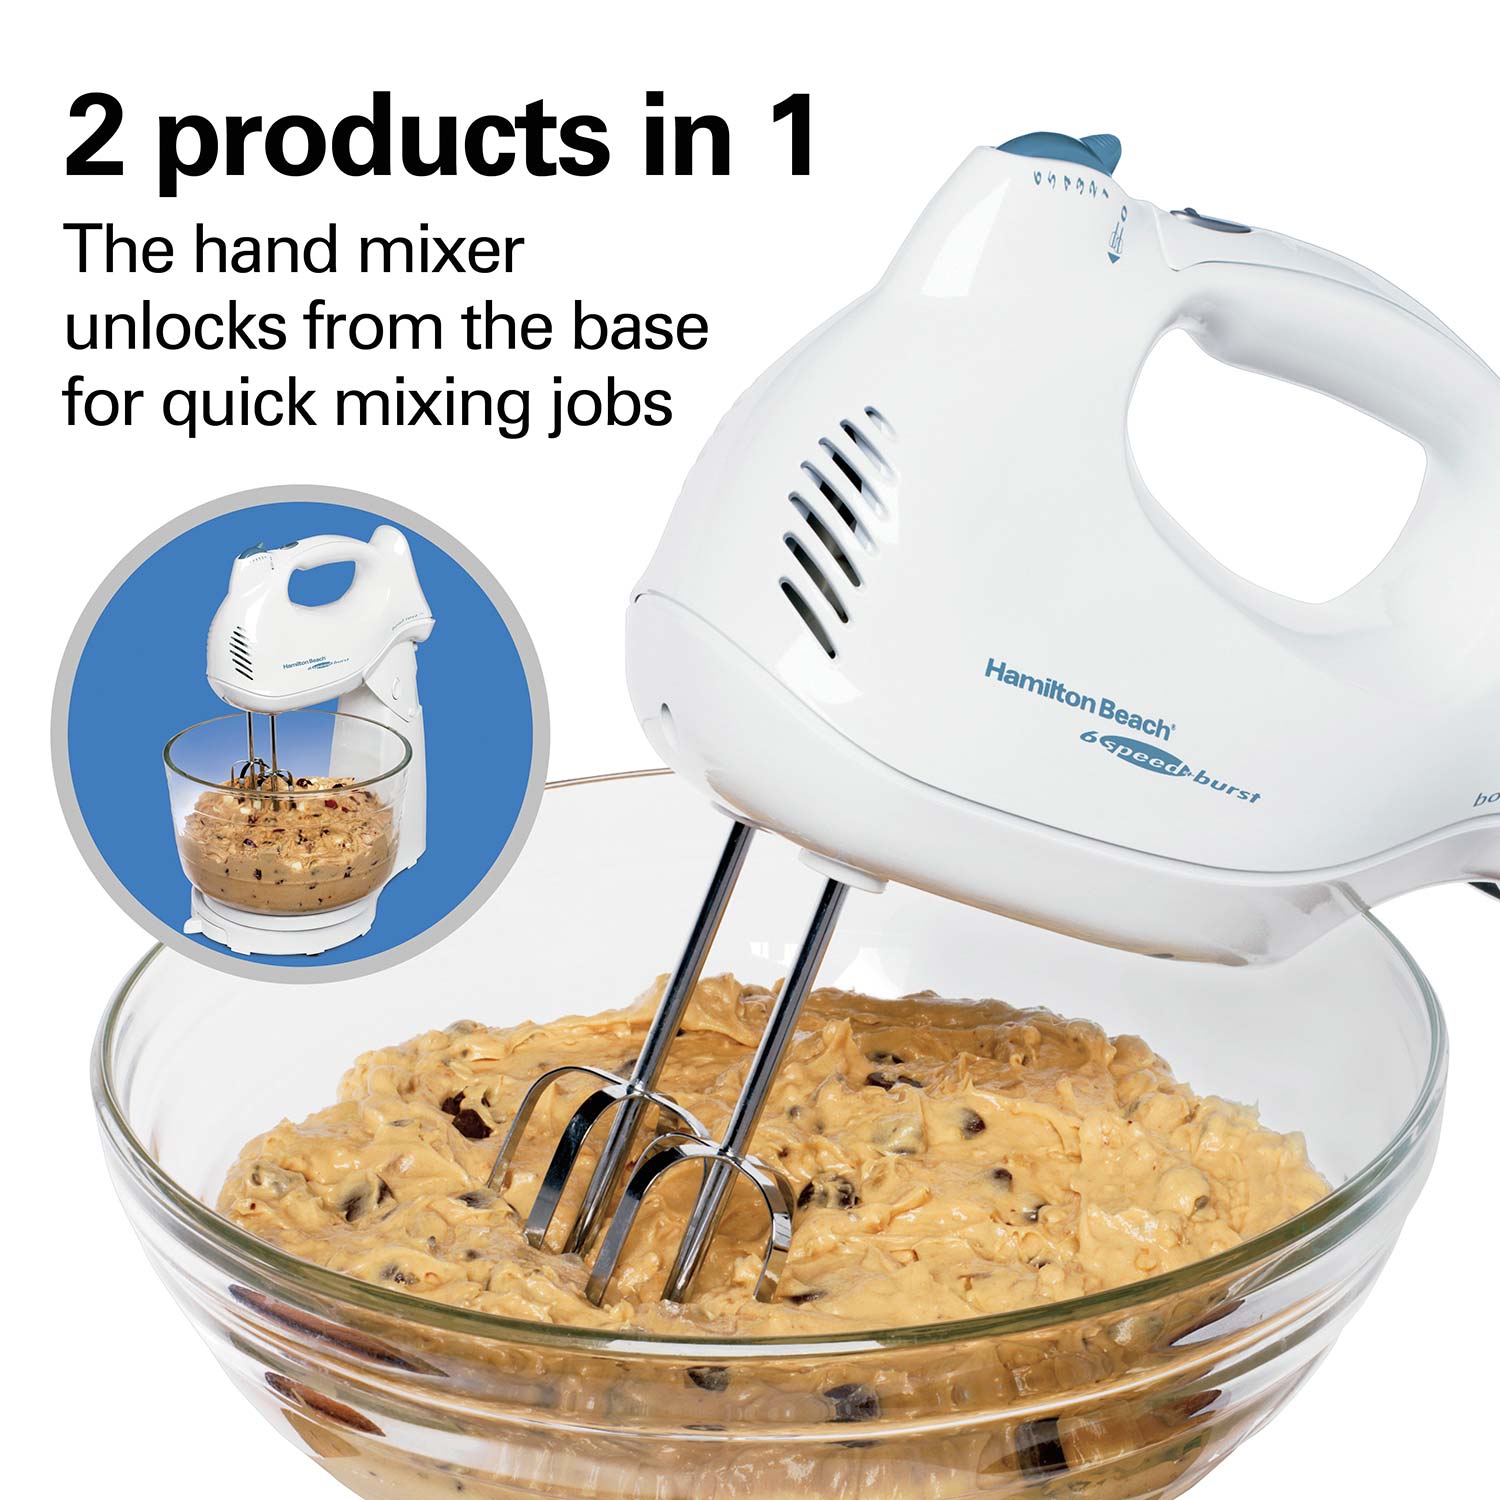 Hamilton Beach Power Deluxe Stand and Hand Mixer, 6 Speeds, 4 Quarts, Red,  64699